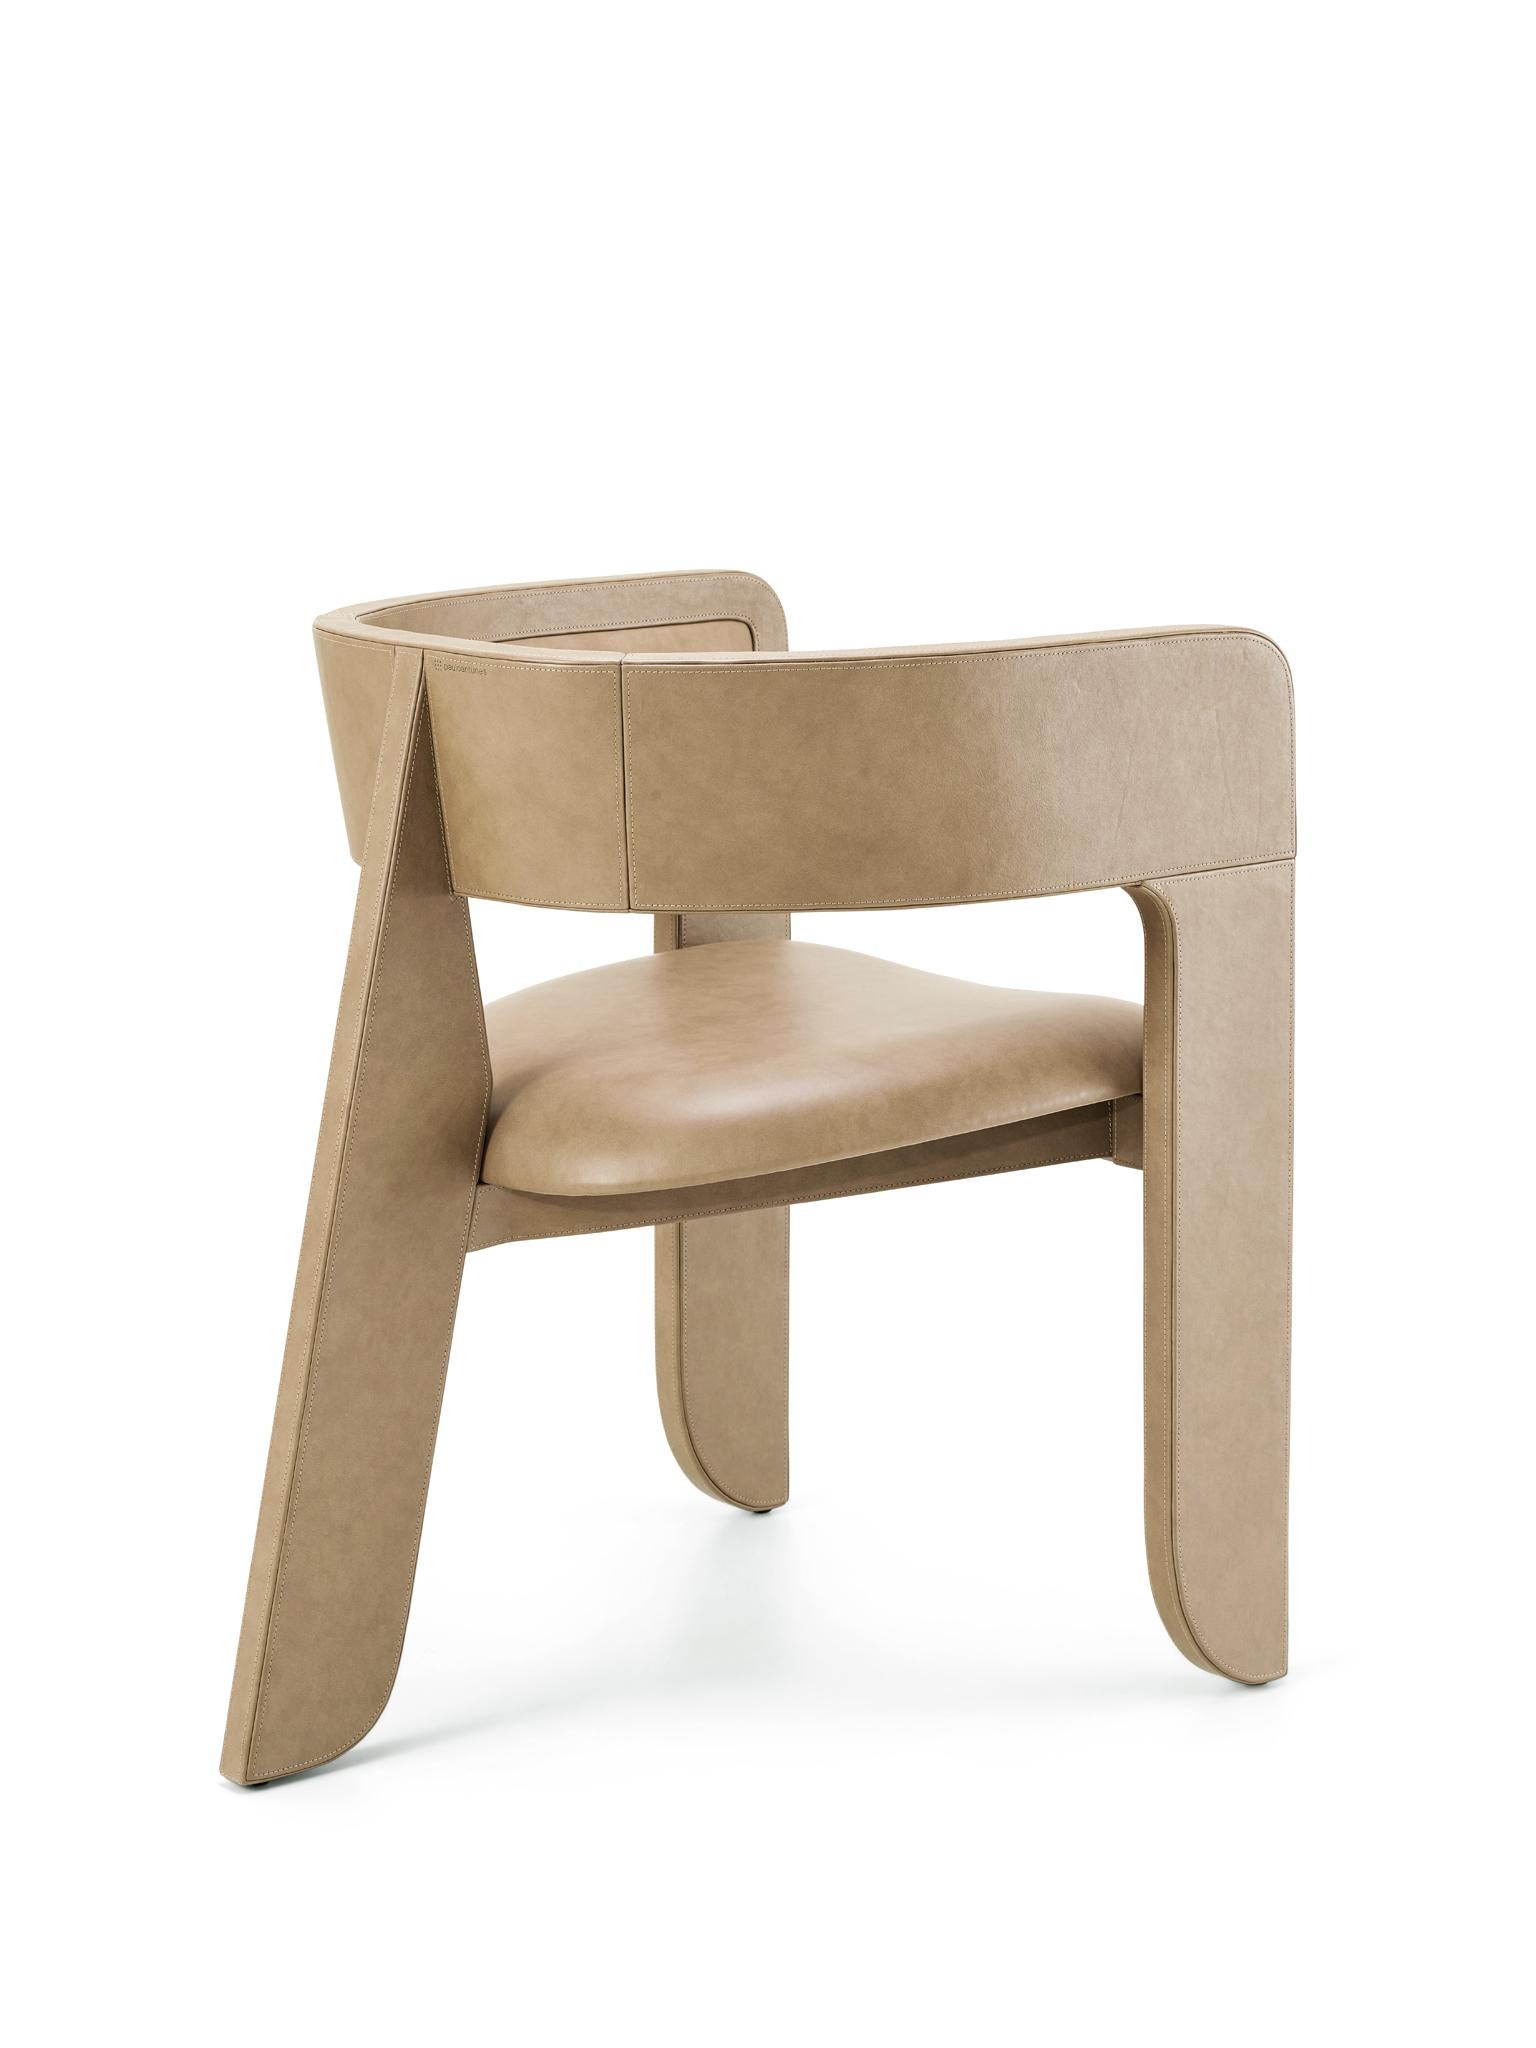 Inspired by the standard chair by Jean Prouvé, and as an ode to the author itself, Jean is a chair that honours the past by looking to the future. Using the iconic back leg shape and giving it a whole new shape, Jean can be defined as a fresh